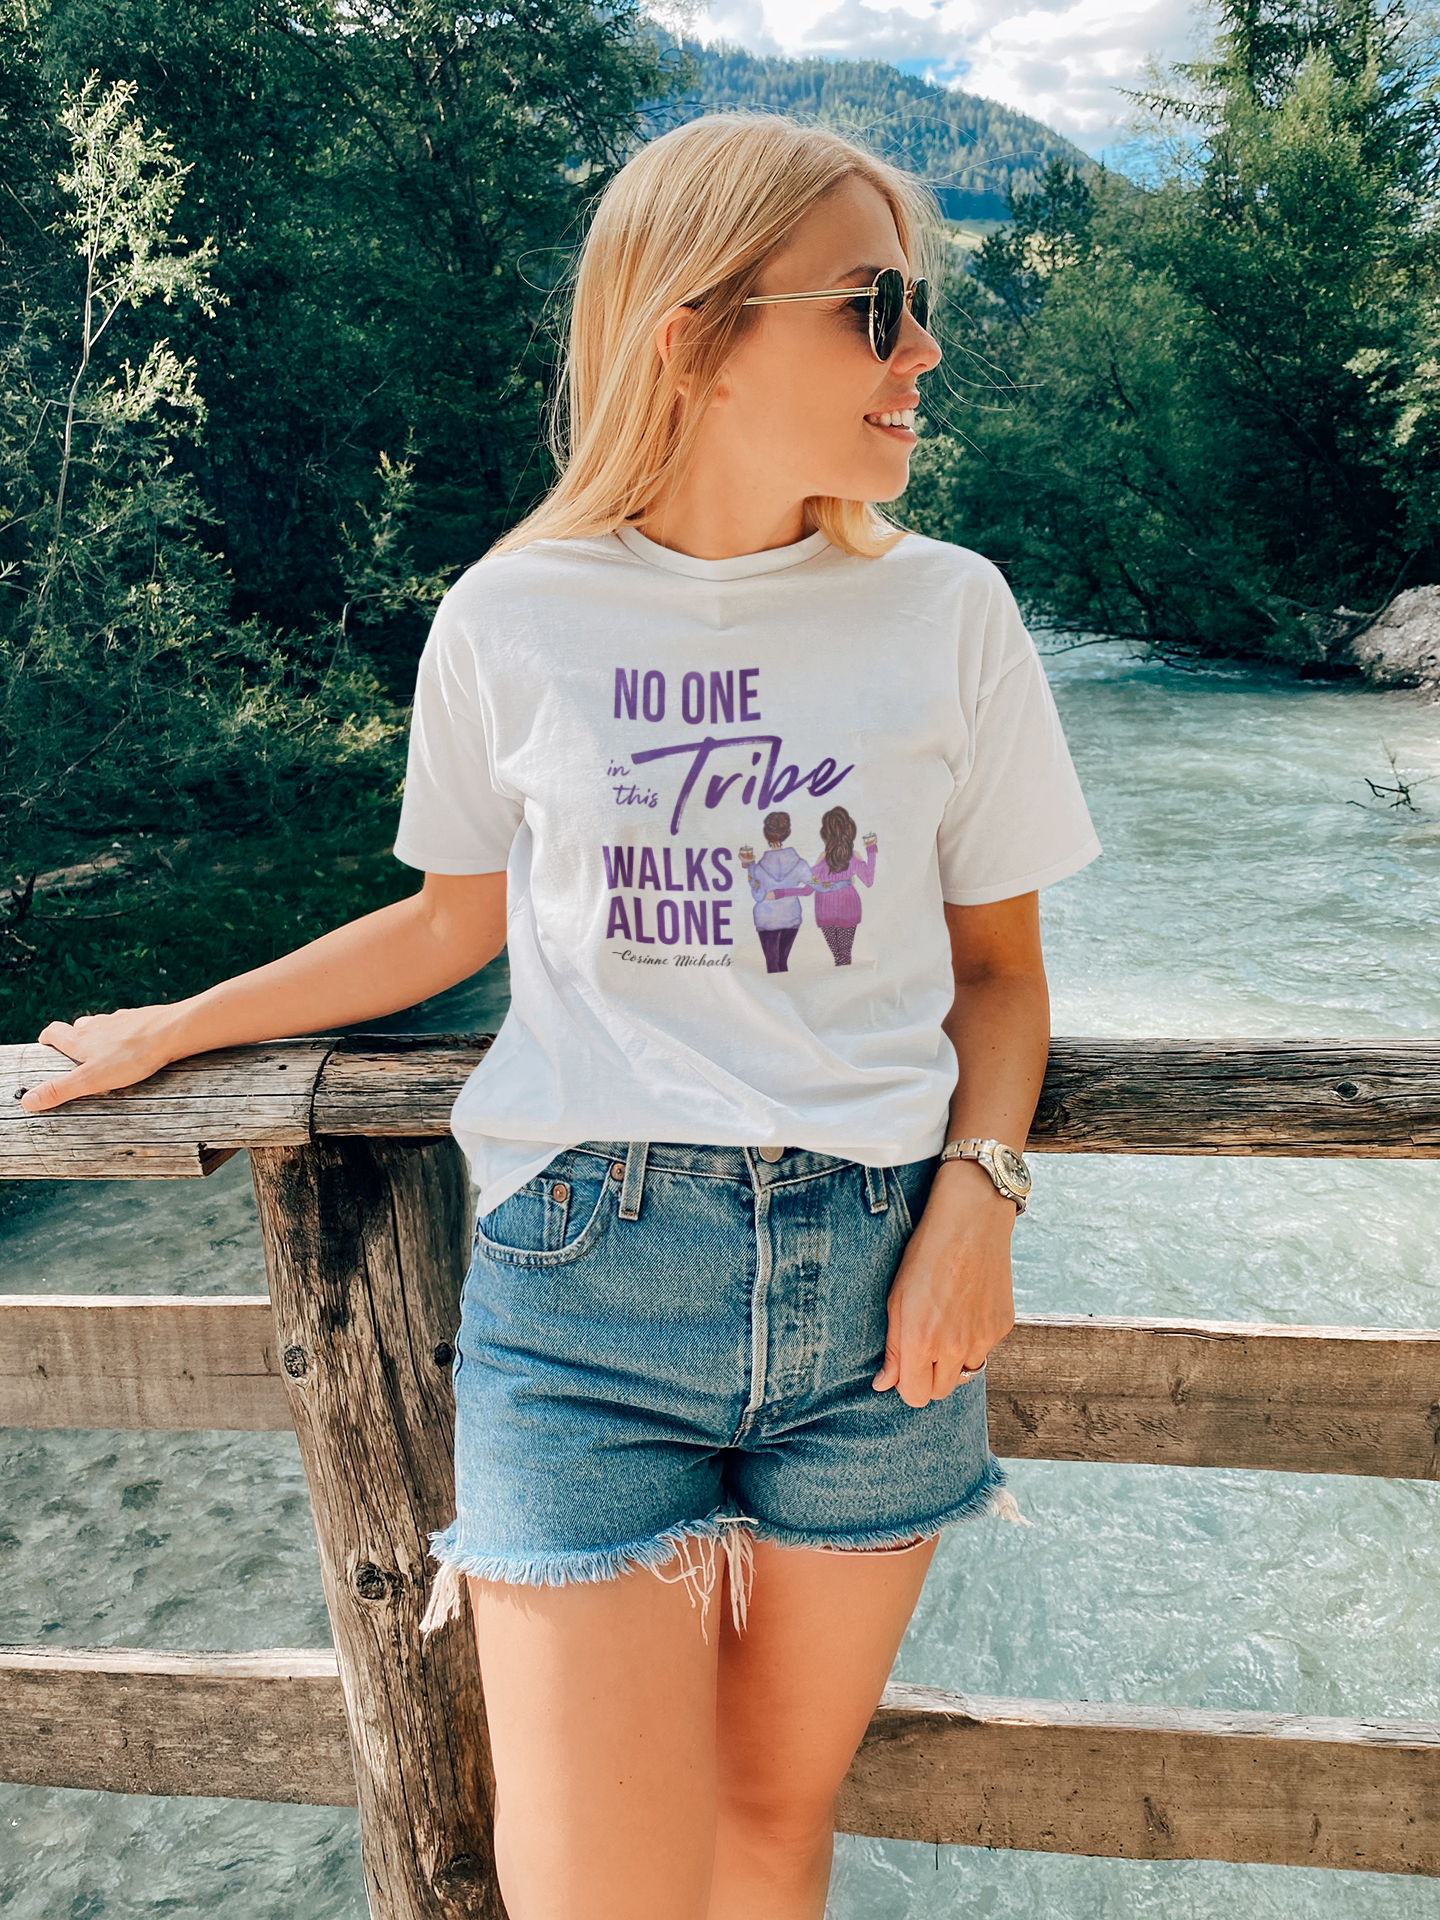 No One in this Tribe Walks Alone - T-shirt